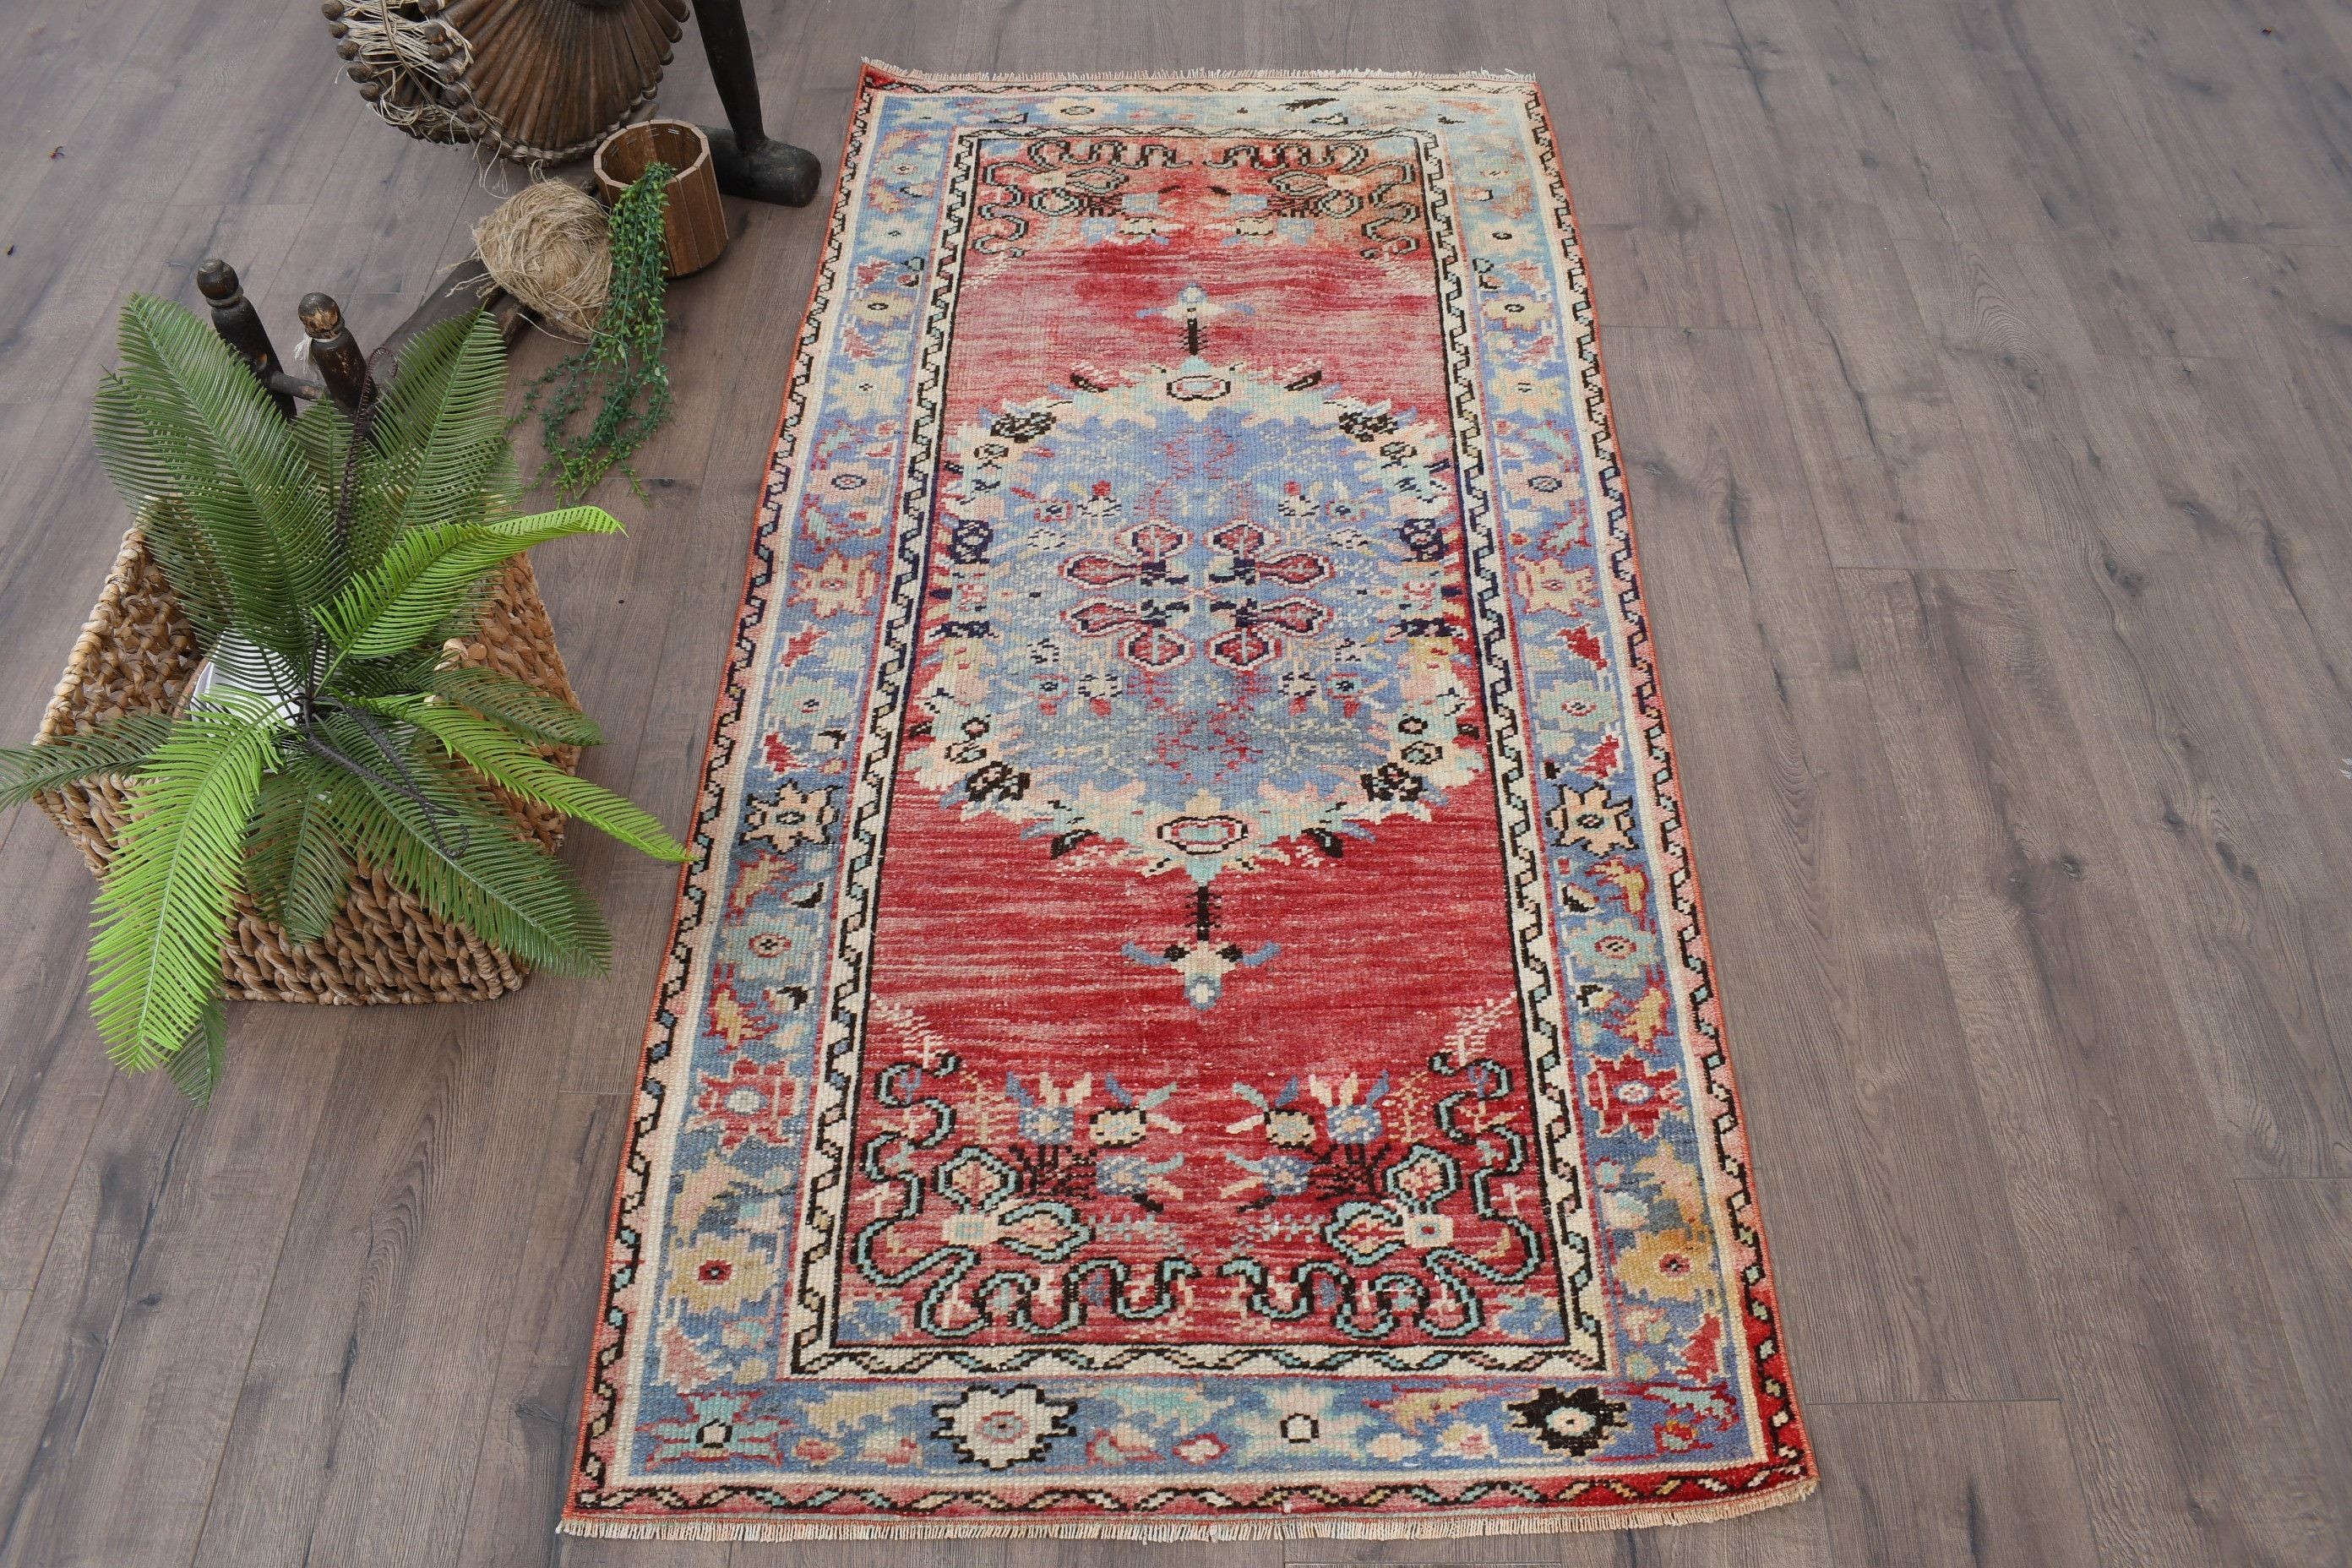 2.9x5.8 ft Accent Rugs, Vintage Decor Rugs, Bedroom Rugs, Turkish Rug, Nursery Rug, Cool Rugs, Vintage Rug, Red Cool Rug, Rugs for Kitchen